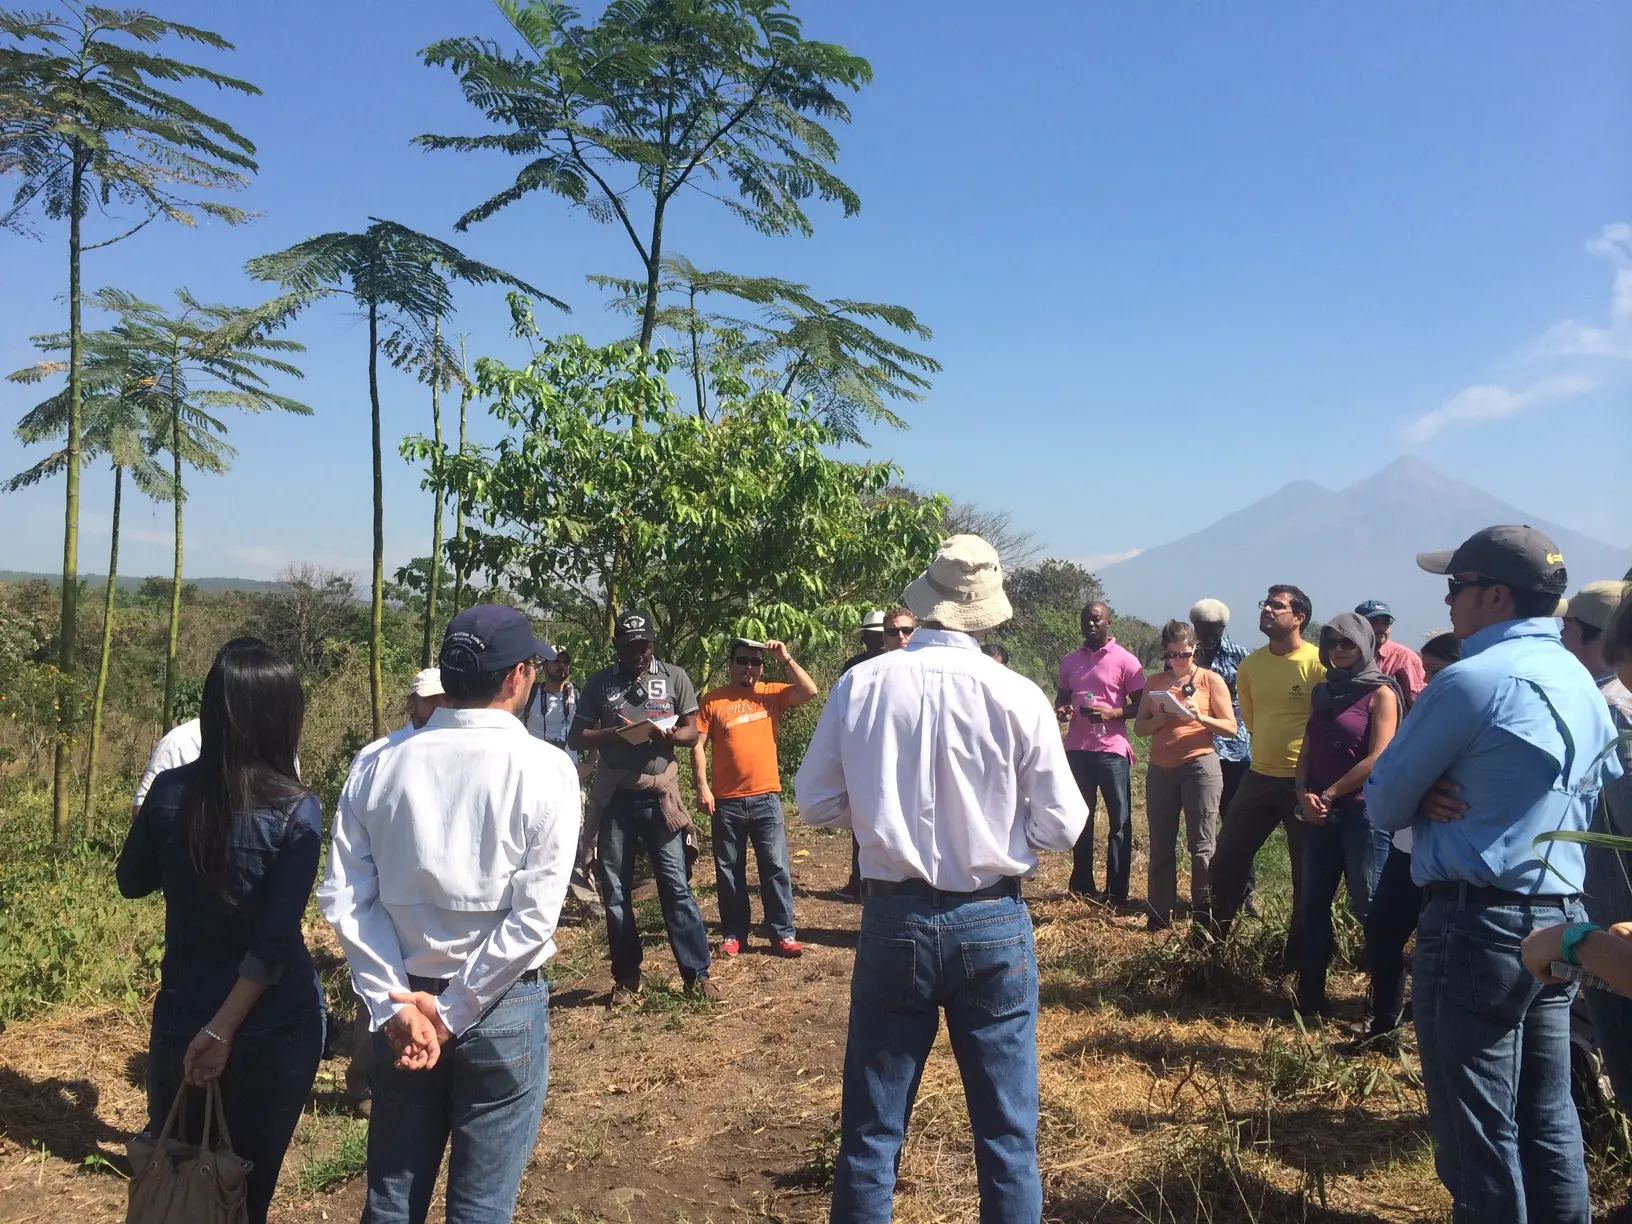 Practitioners came together last month to share experiences on financing restoration. In Guatemala the sugar cane industry has financed restoration around productive fields to protect local water supplies.